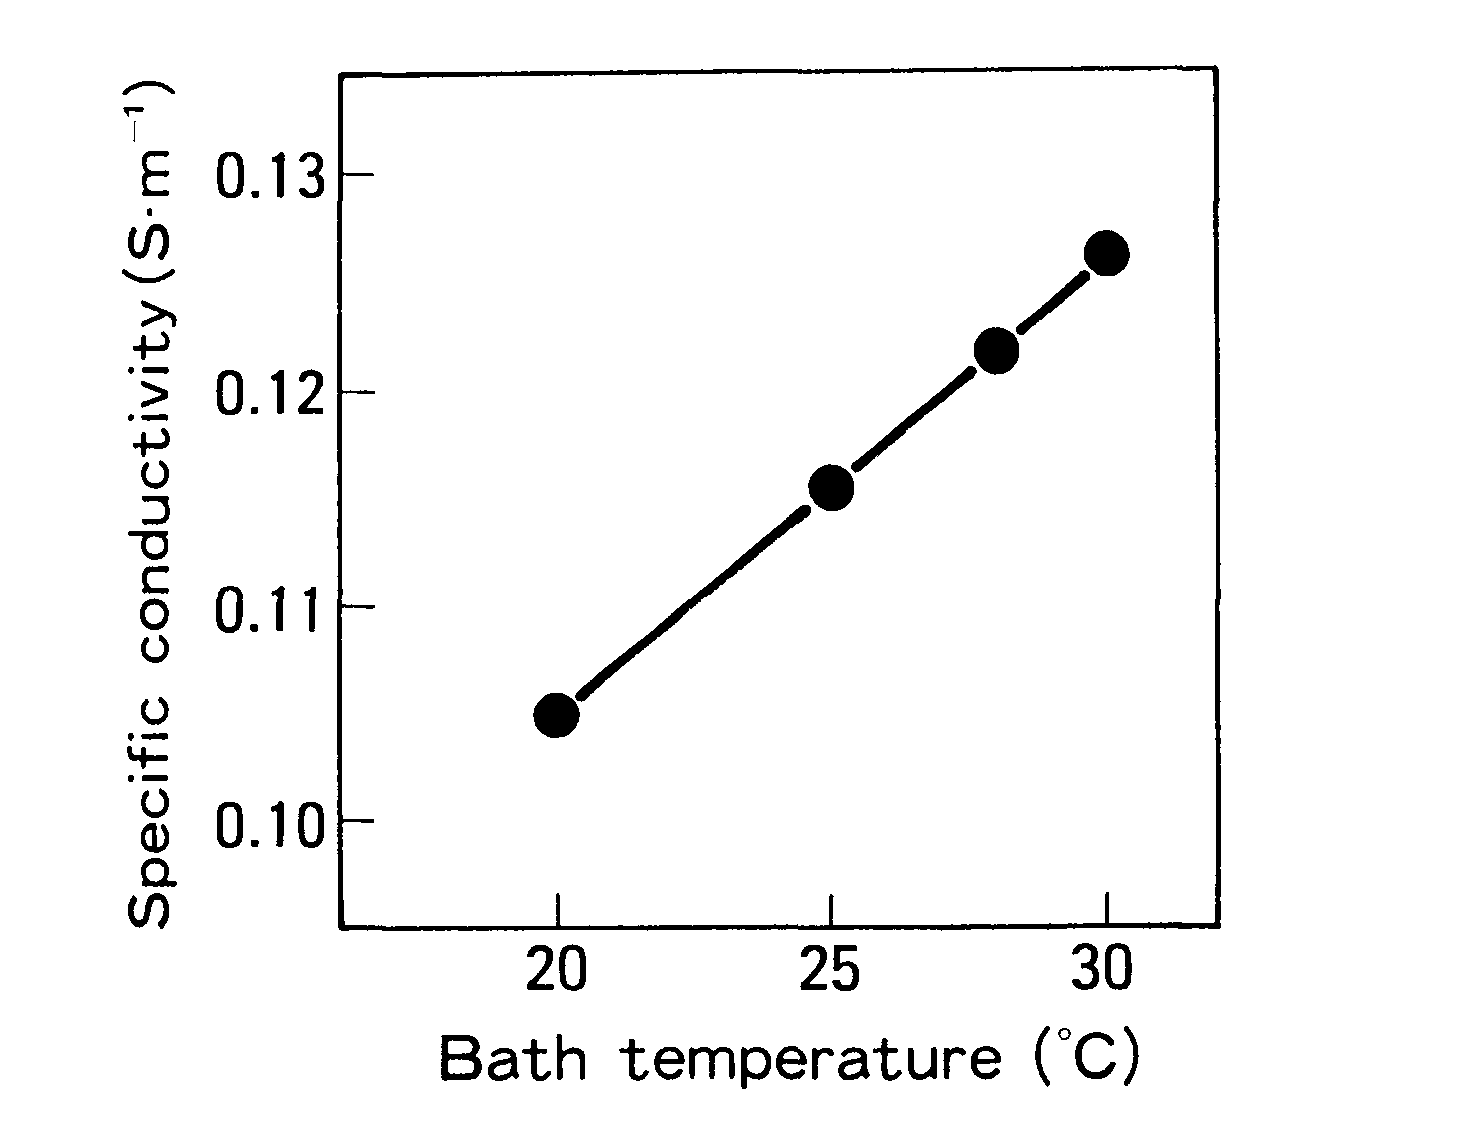 Relationship between bath temperature and conductivity (epoxy paint).